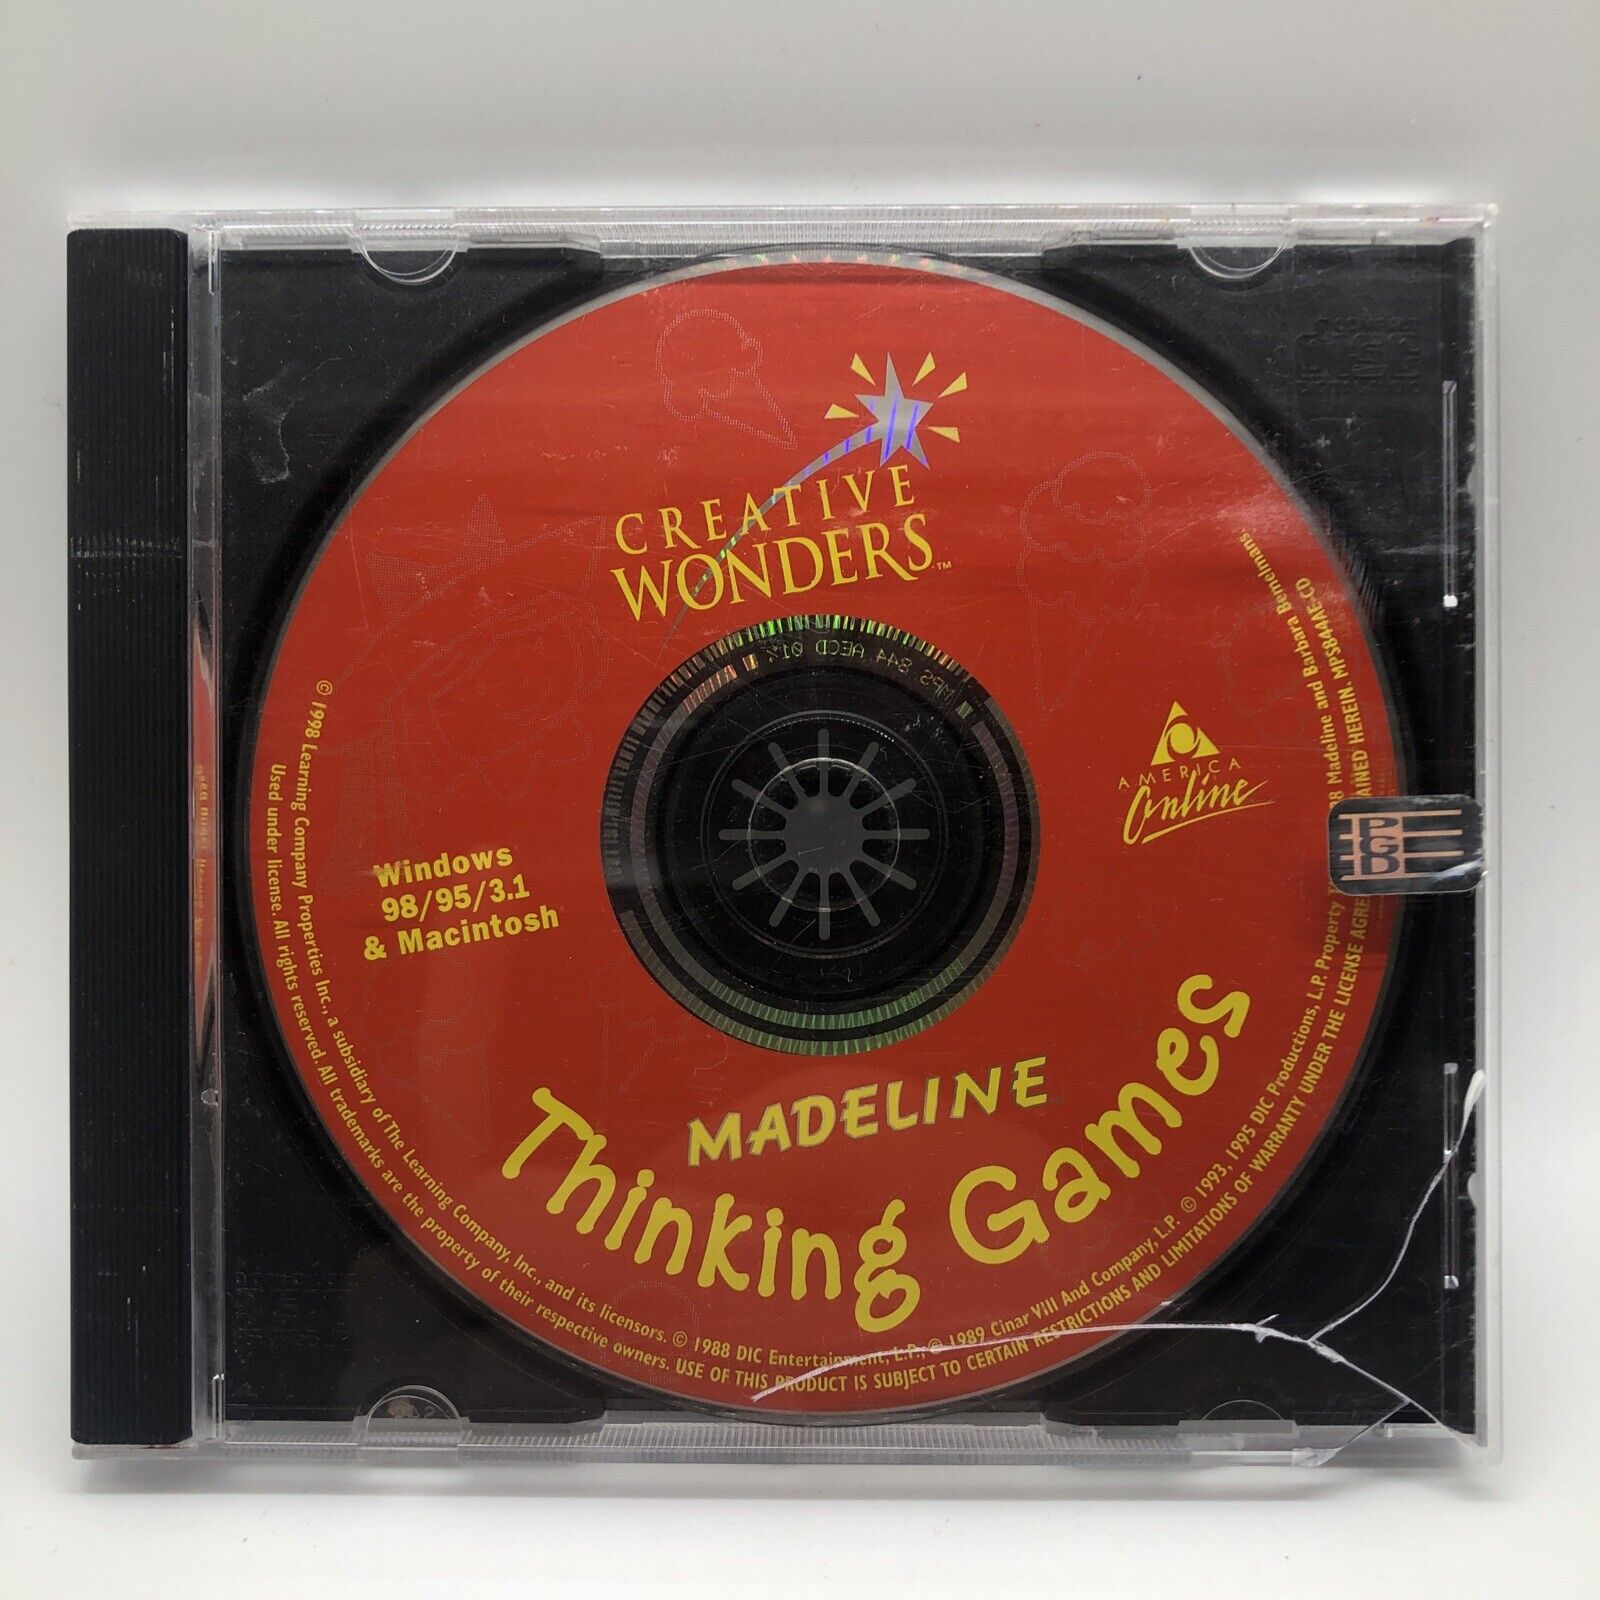 The Learning Company Madeline Thinking Games for PC, Mac